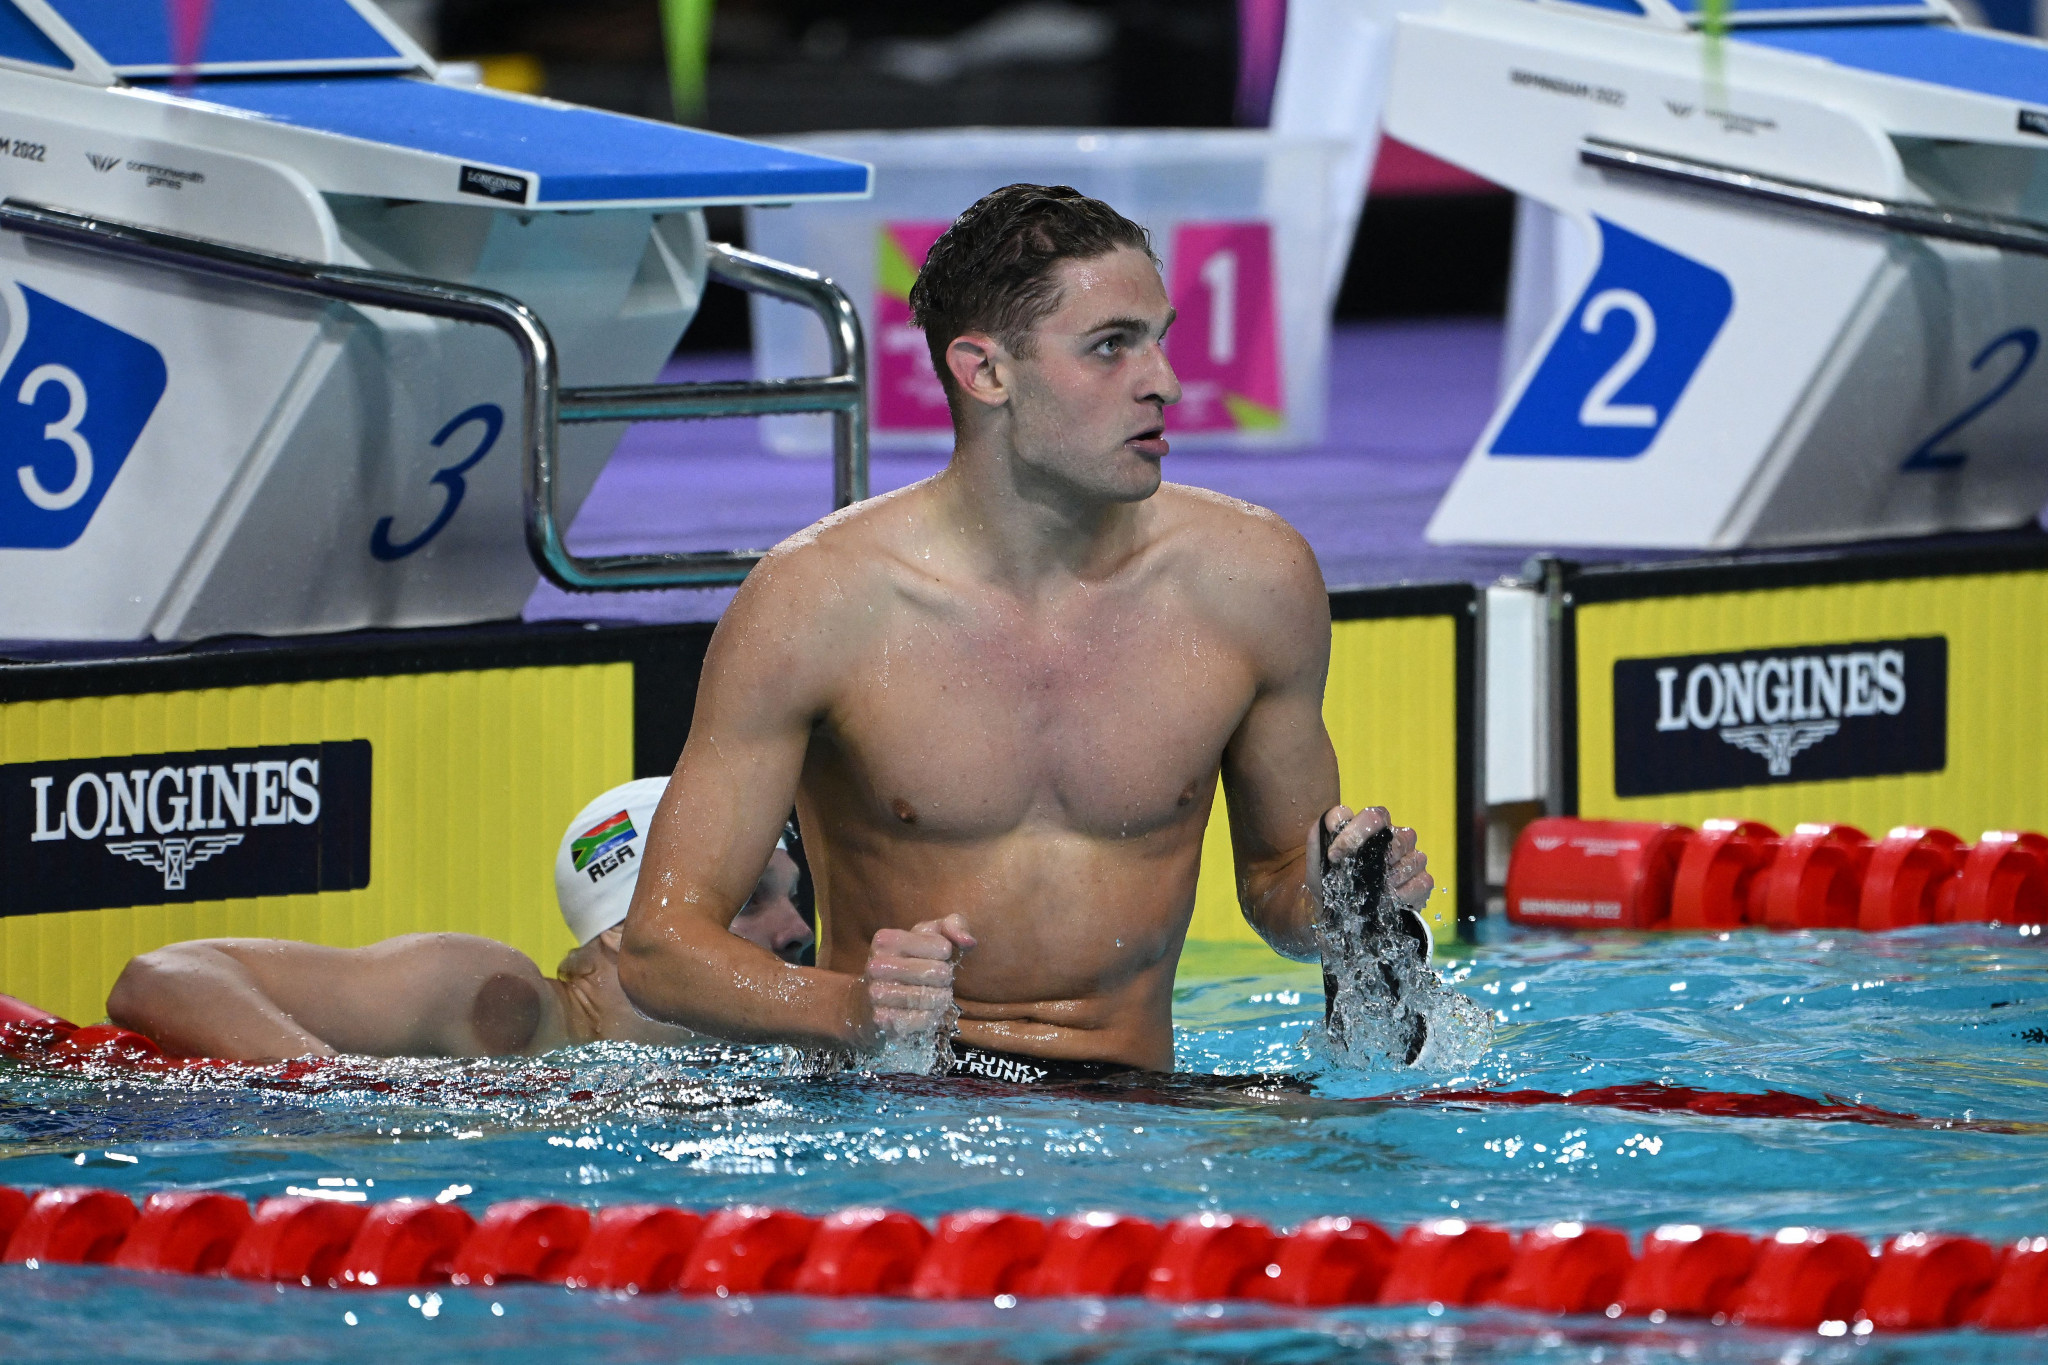 New Zealand's Lewis Clareburt took victory in the men's 400m individual medley by more than one second ©Getty Images